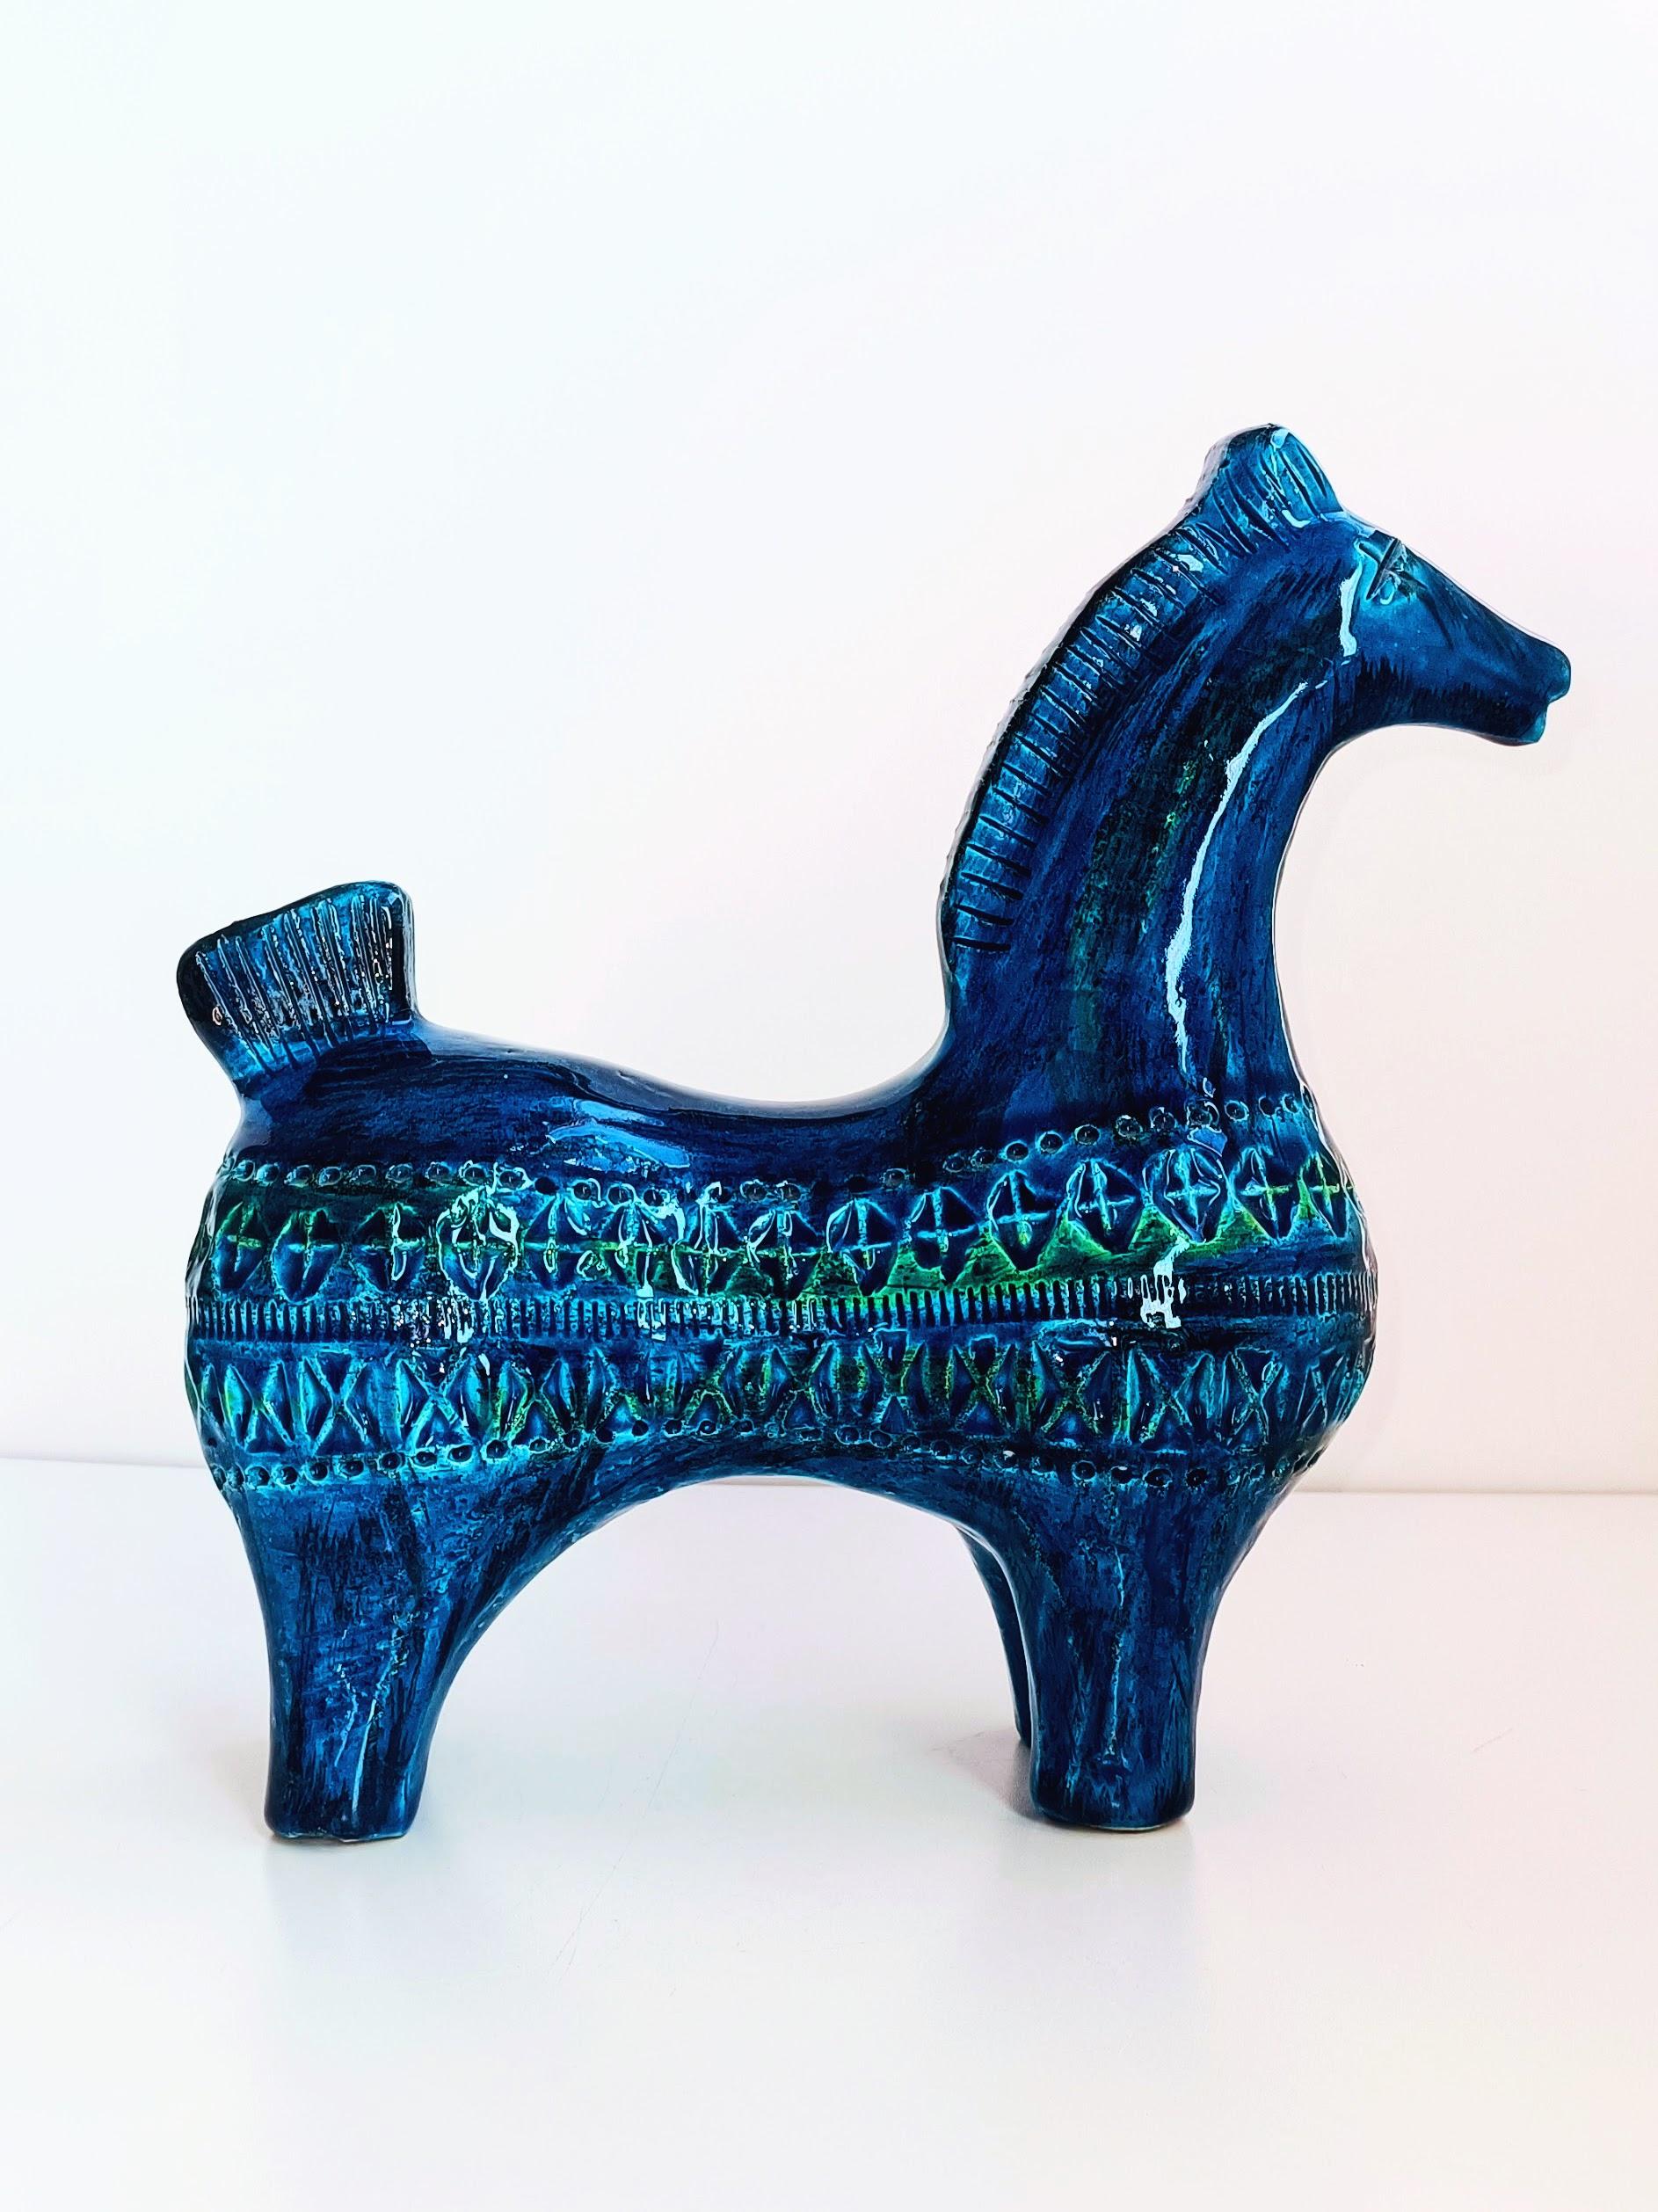 Ceramic horse sculpture by Aldo Londi for Bitossi from the Rimini Blu range. Large, beautiful, bold piece. In flawless condition. Stunning in the hand. Collector's piece. Produced in Flavia Montelupo, Italy, circa the 1960s.

Measurements:

Height